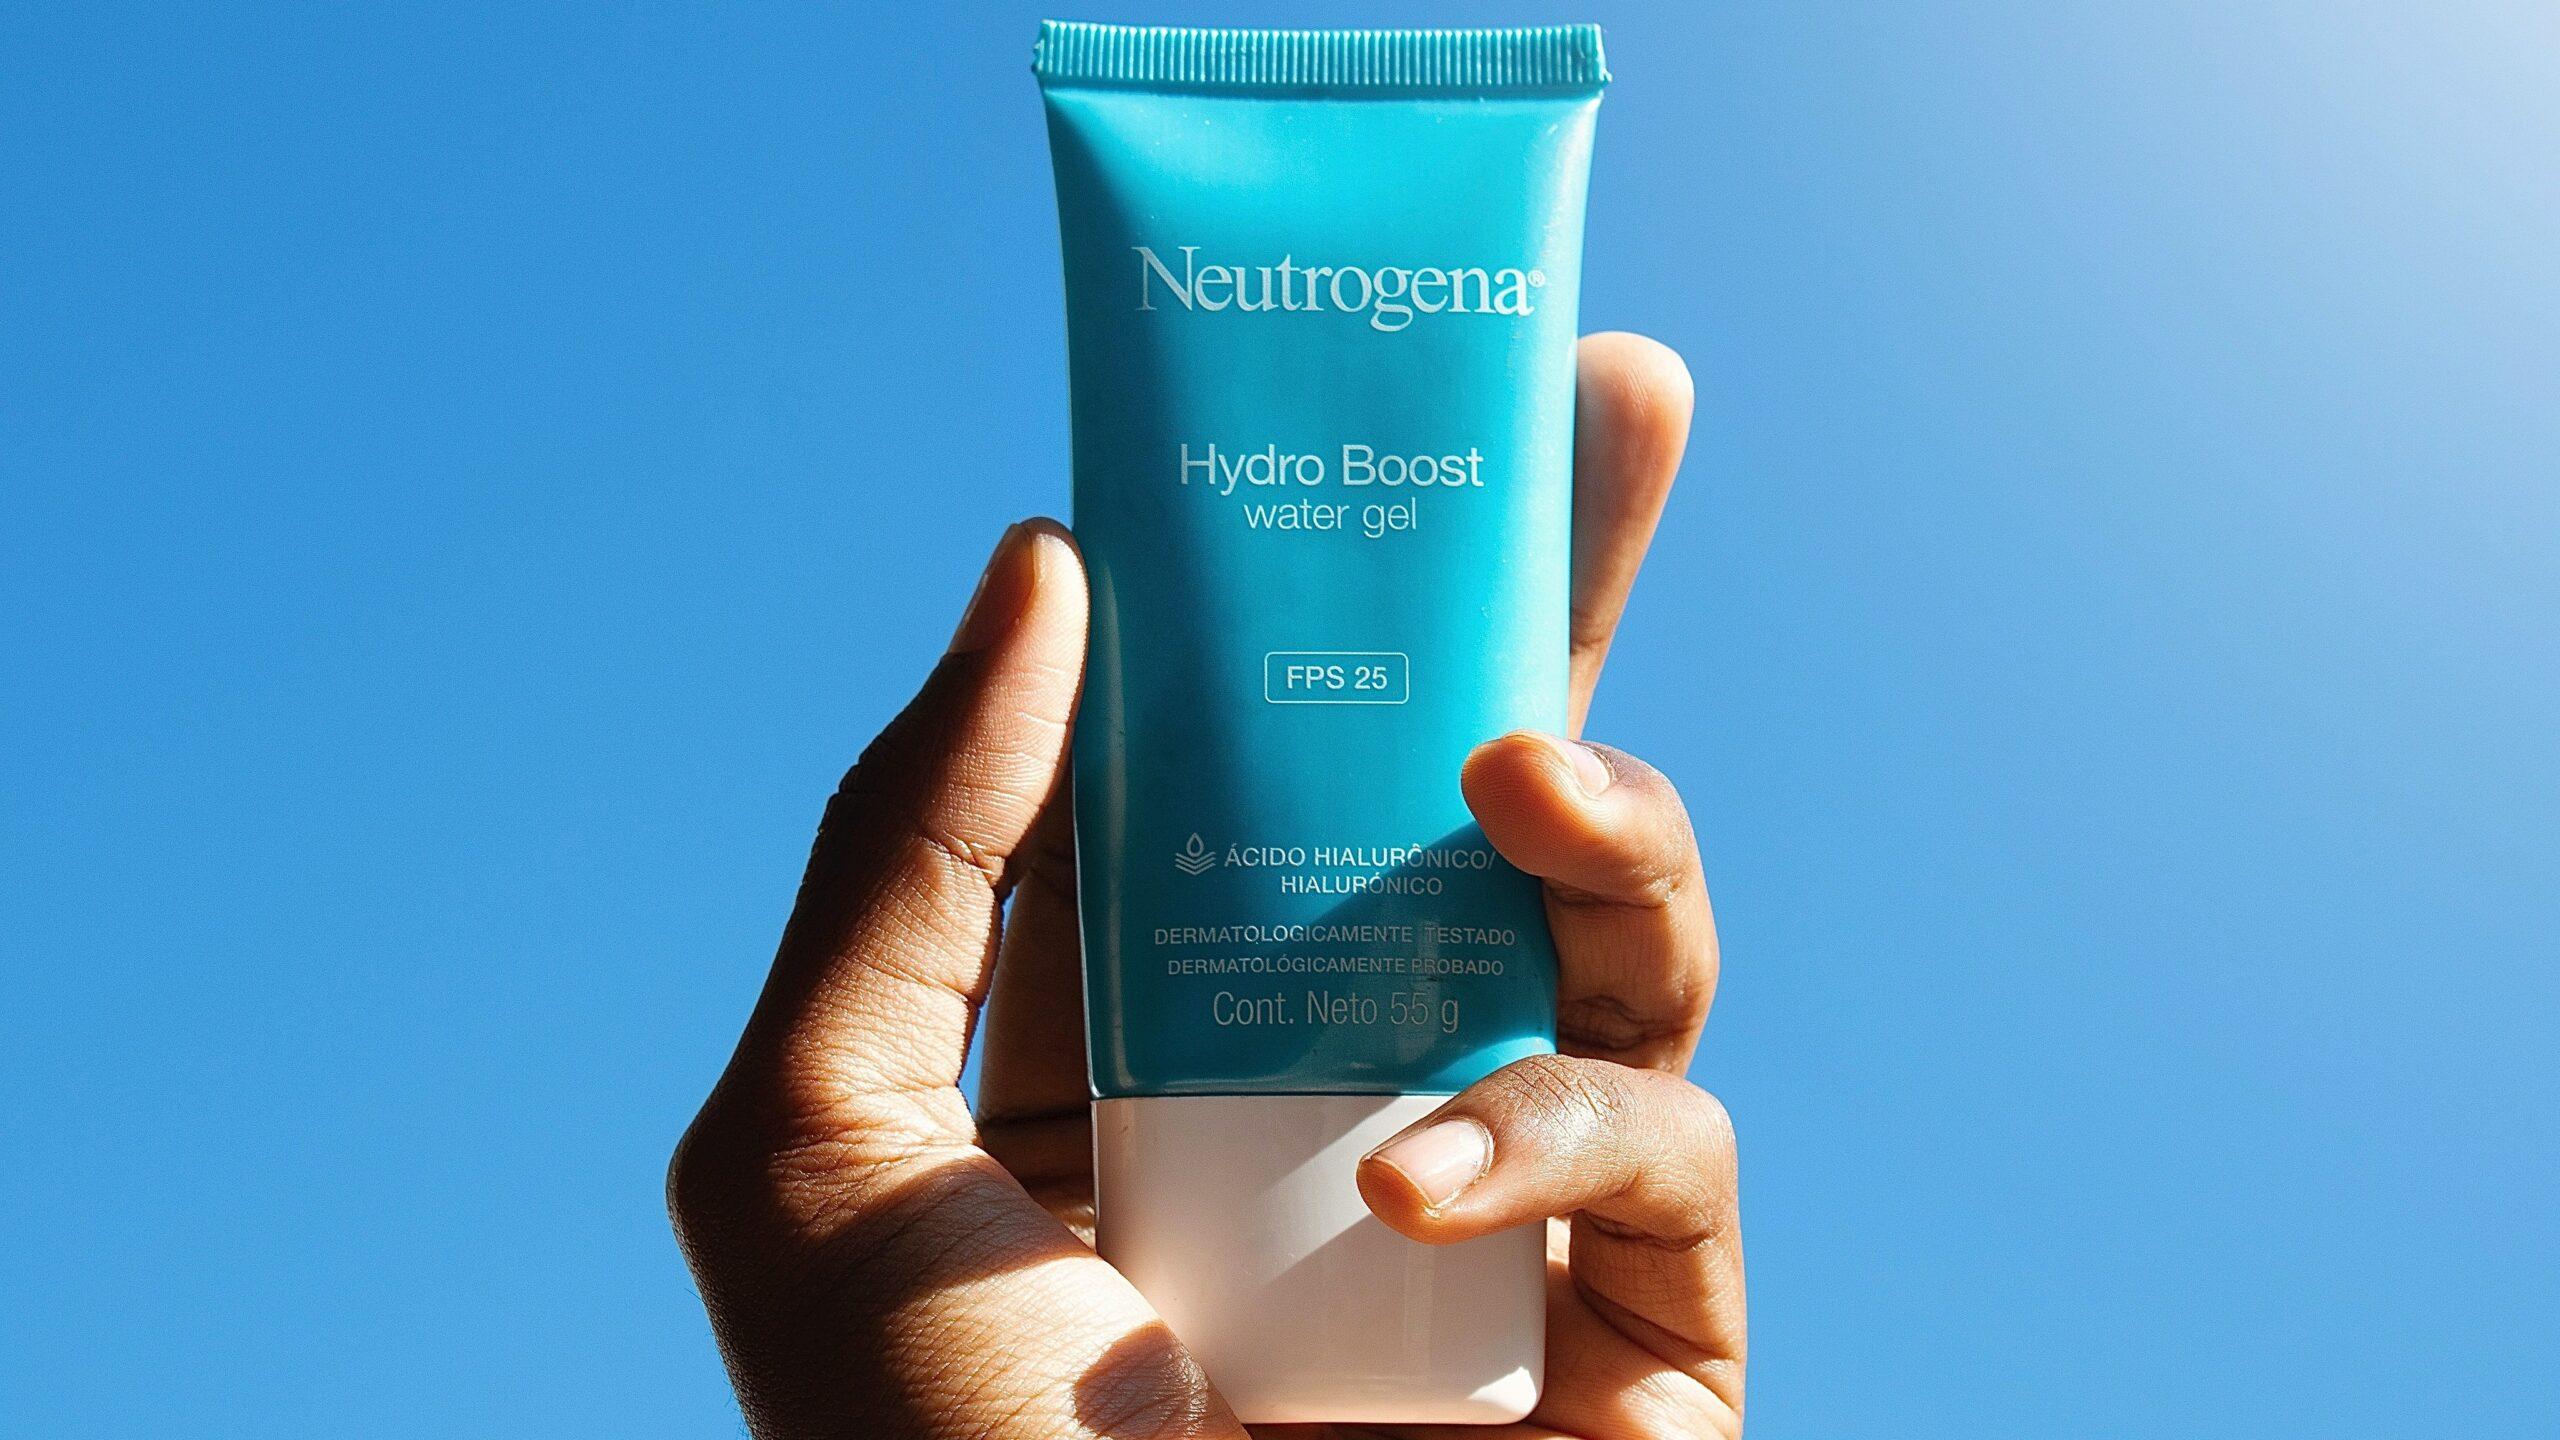 Close up of a hand holding a bottle of Neutrogena water gel against a backdrop of blue sky.